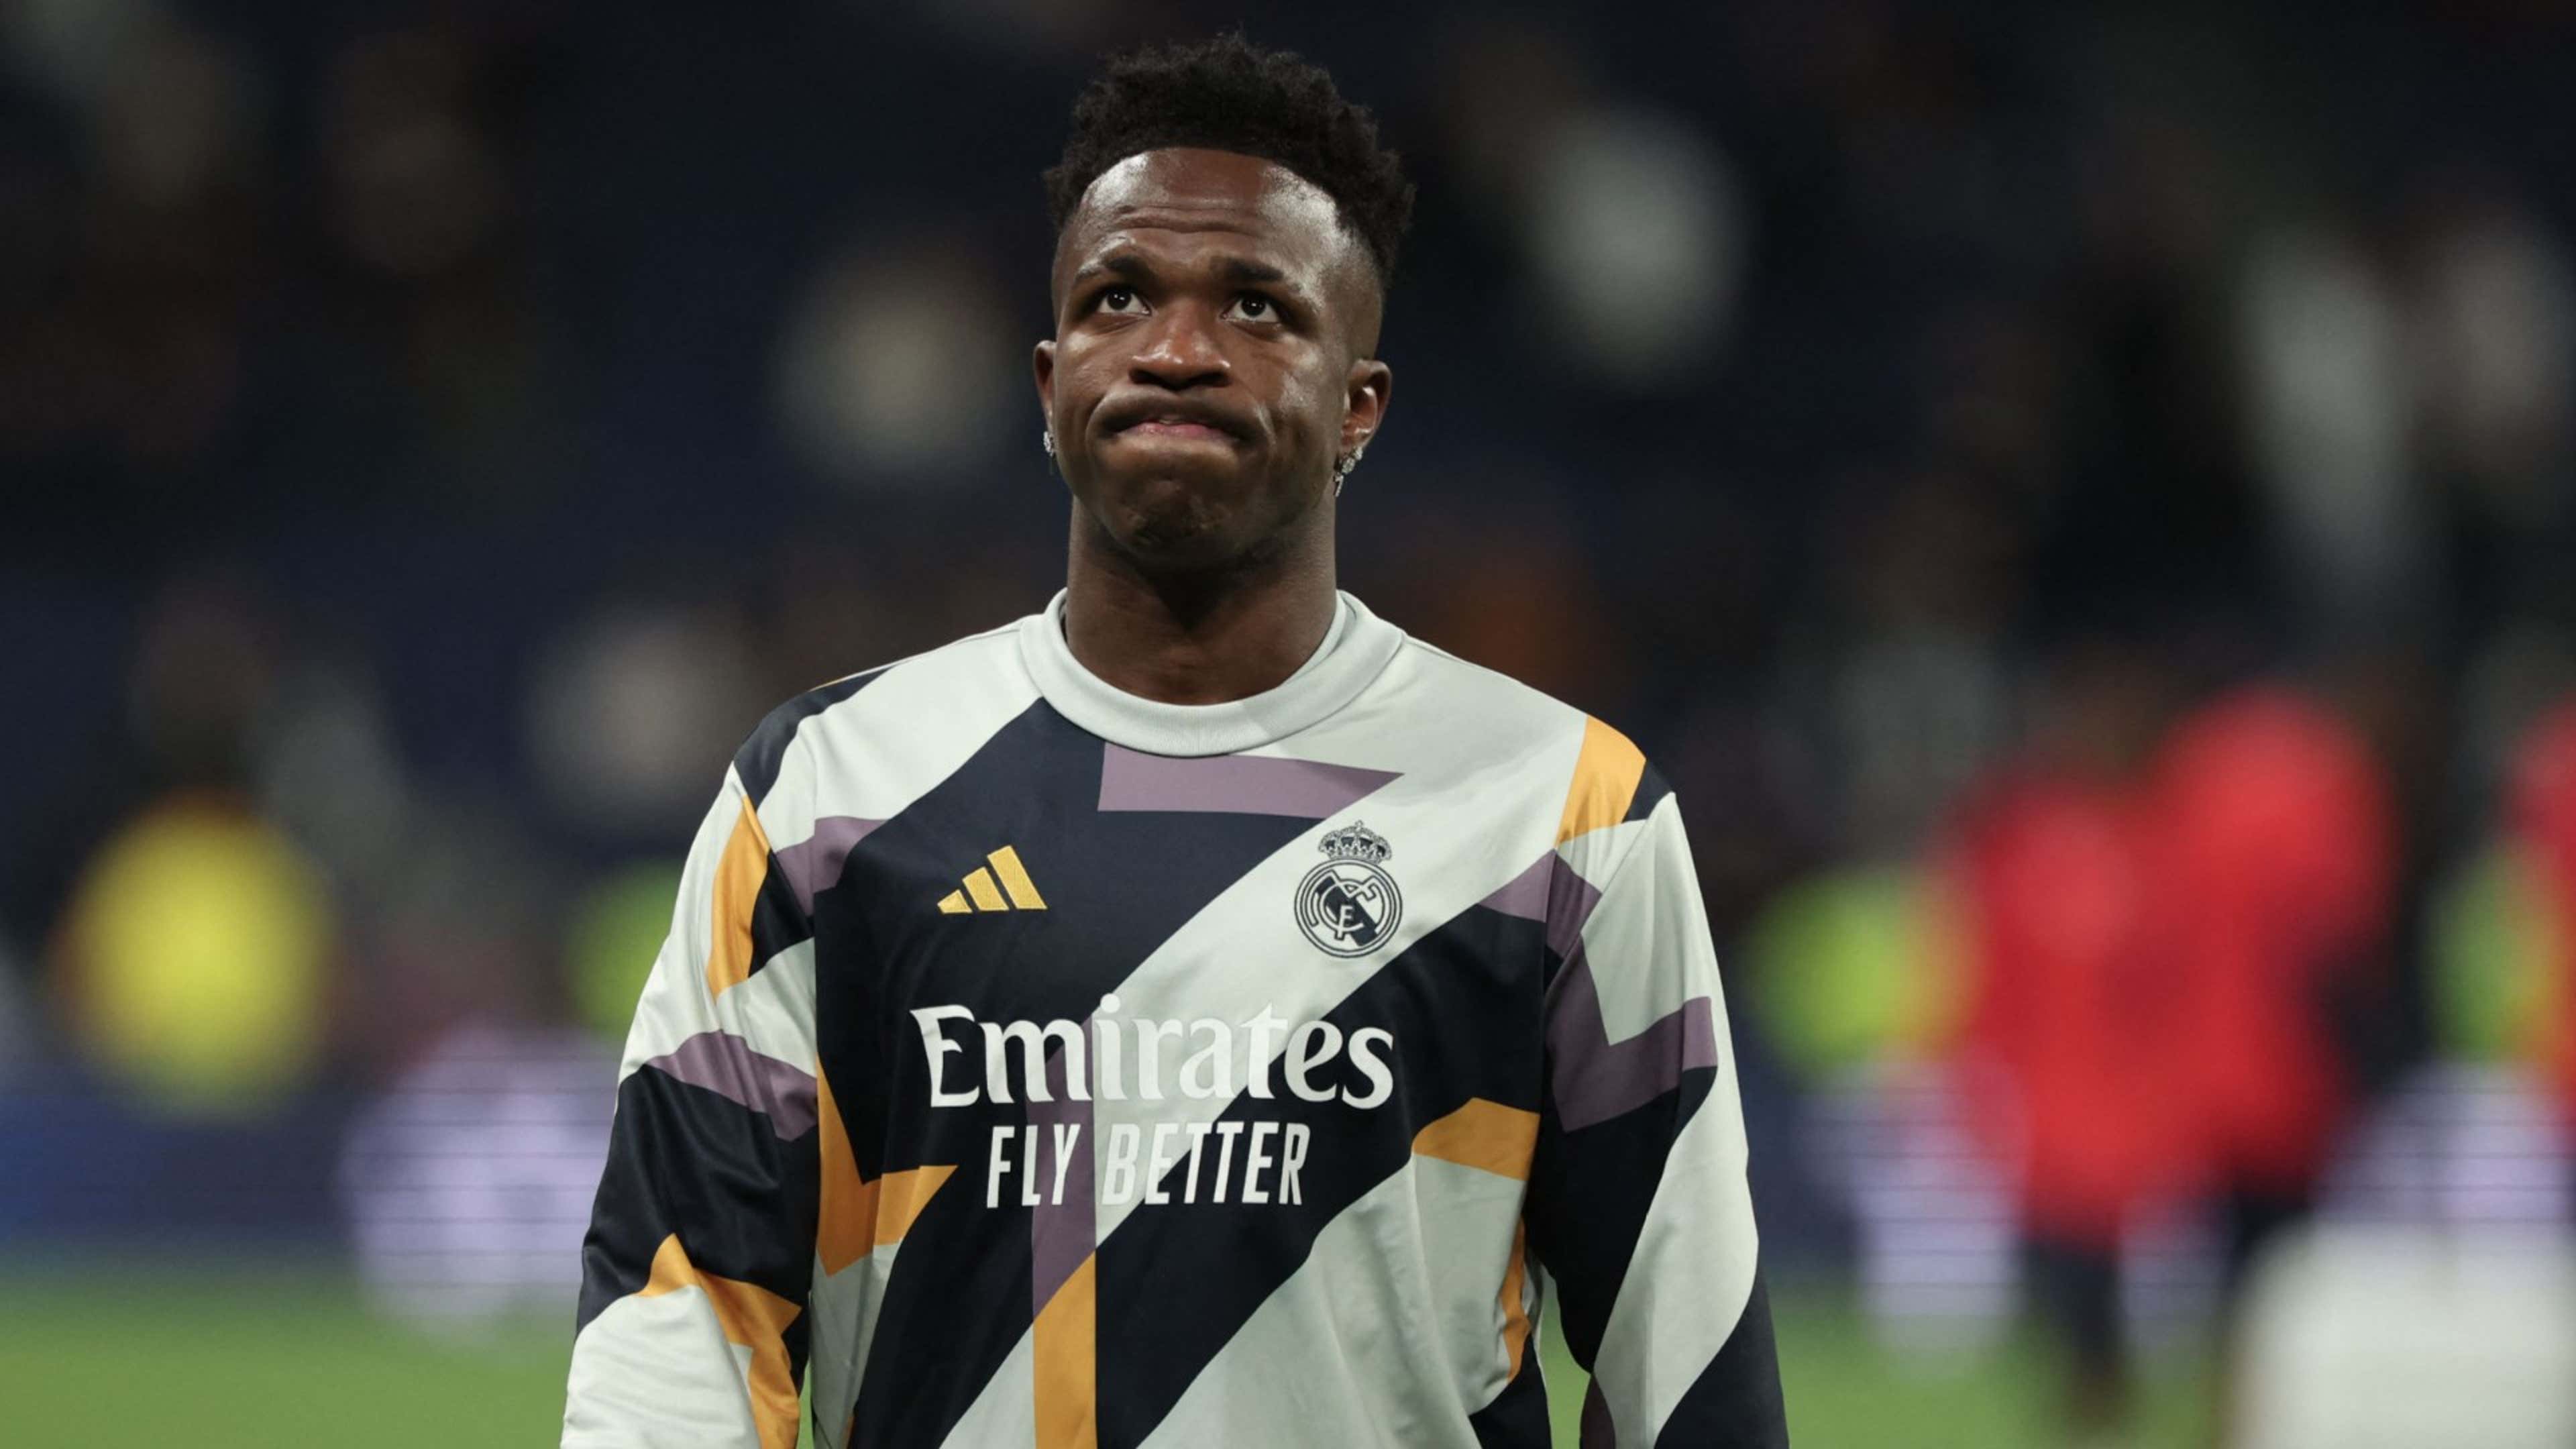 Monumental blow for Real Madrid as Vinicius Junior out for 10 WEEKS after suffering torn hamstring on Brazil duty | Goal.com